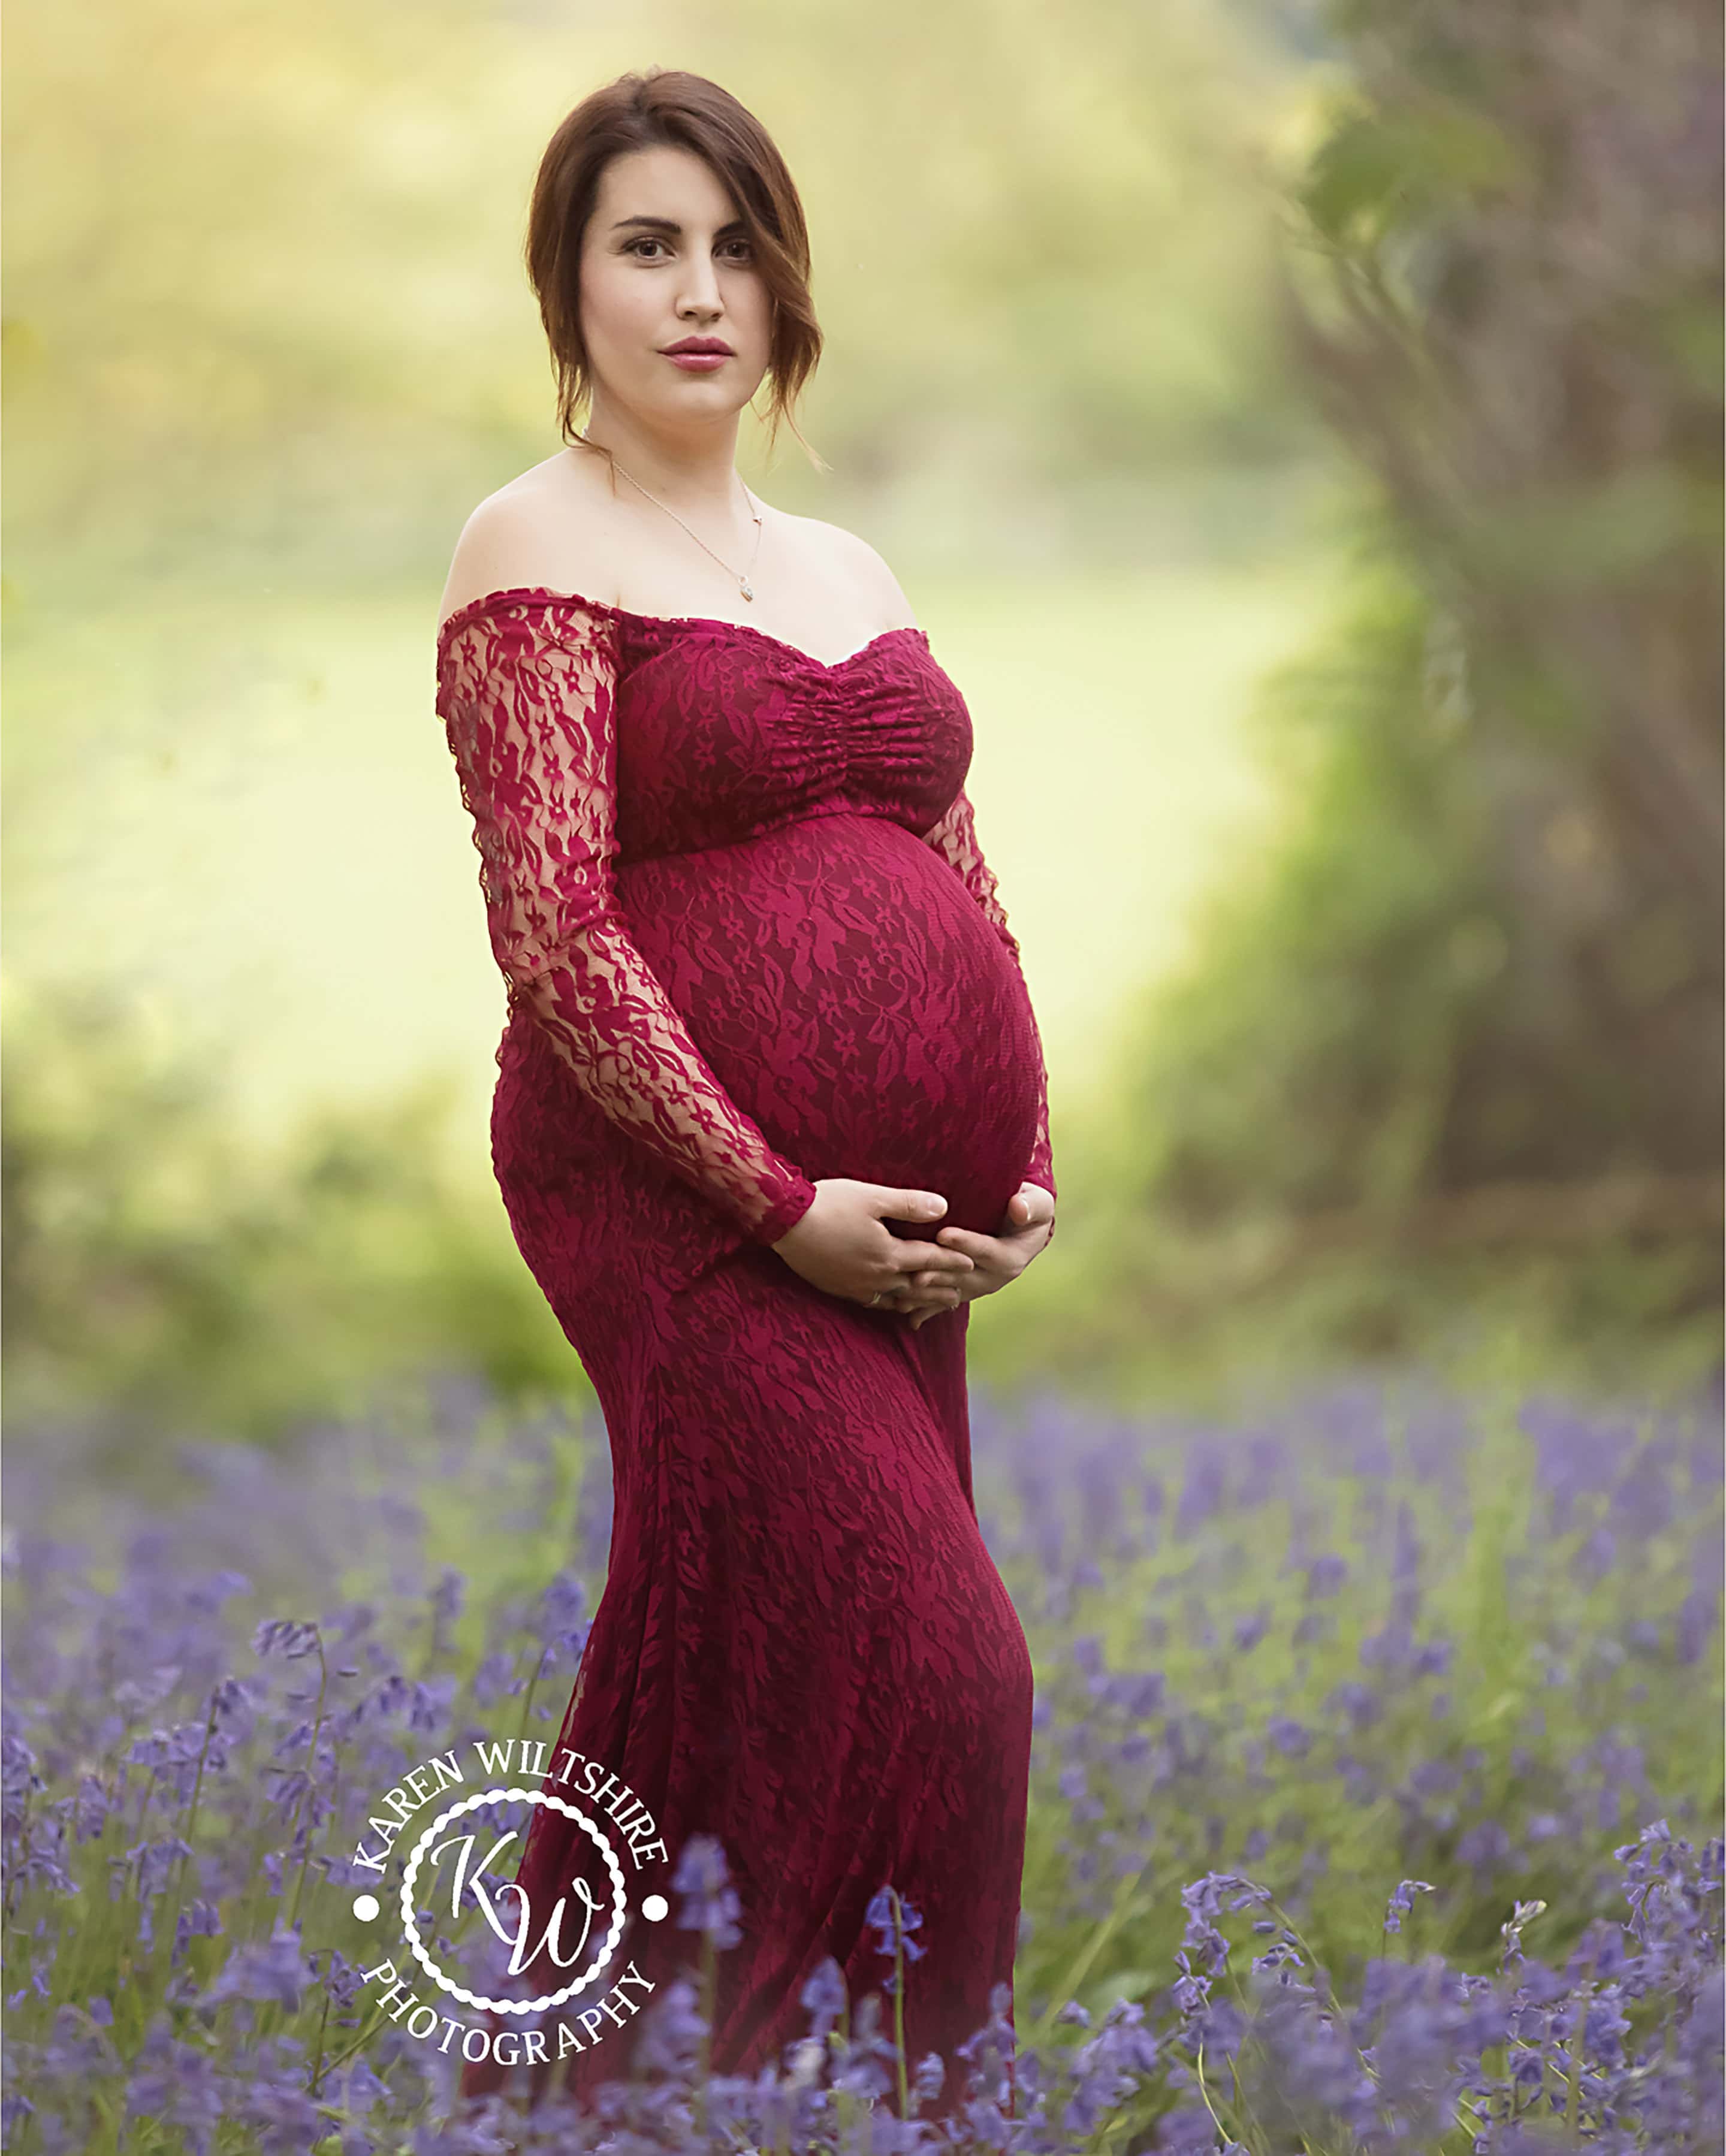 Pregnant lady in red dress standing in a bluebell wood.